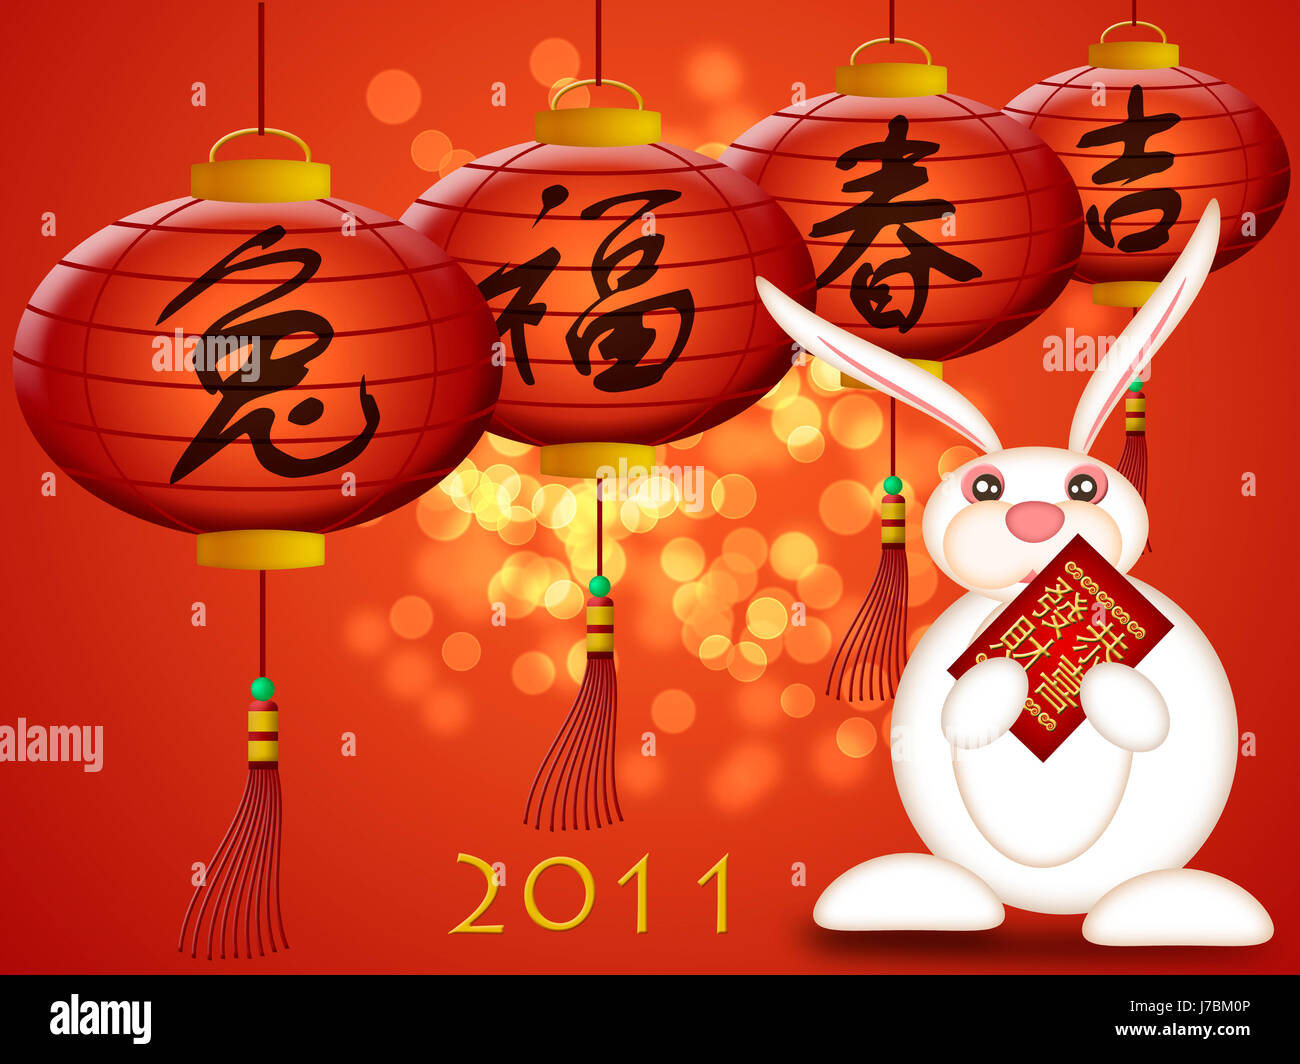 new rabbit lantern chinese years year red greeting lights new spring bouncing Stock Photo